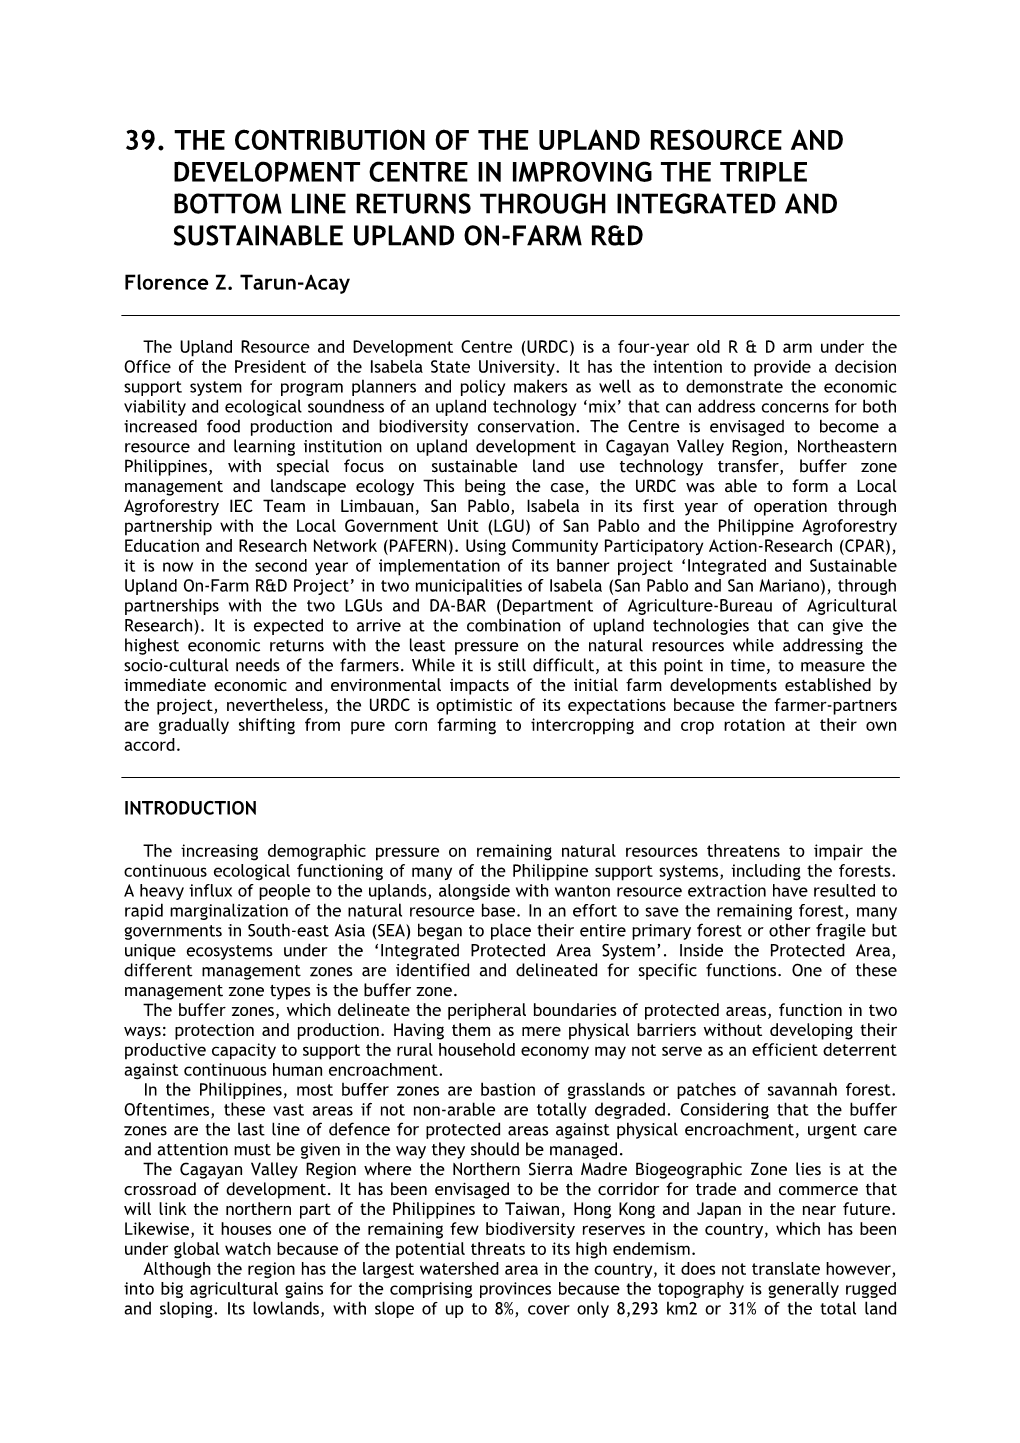 39. the Contribution of the Upland Resource and Development Centre in Improving the Triple Bottom Line Returns Through Integrated and Sustainable Upland On-Farm R&D